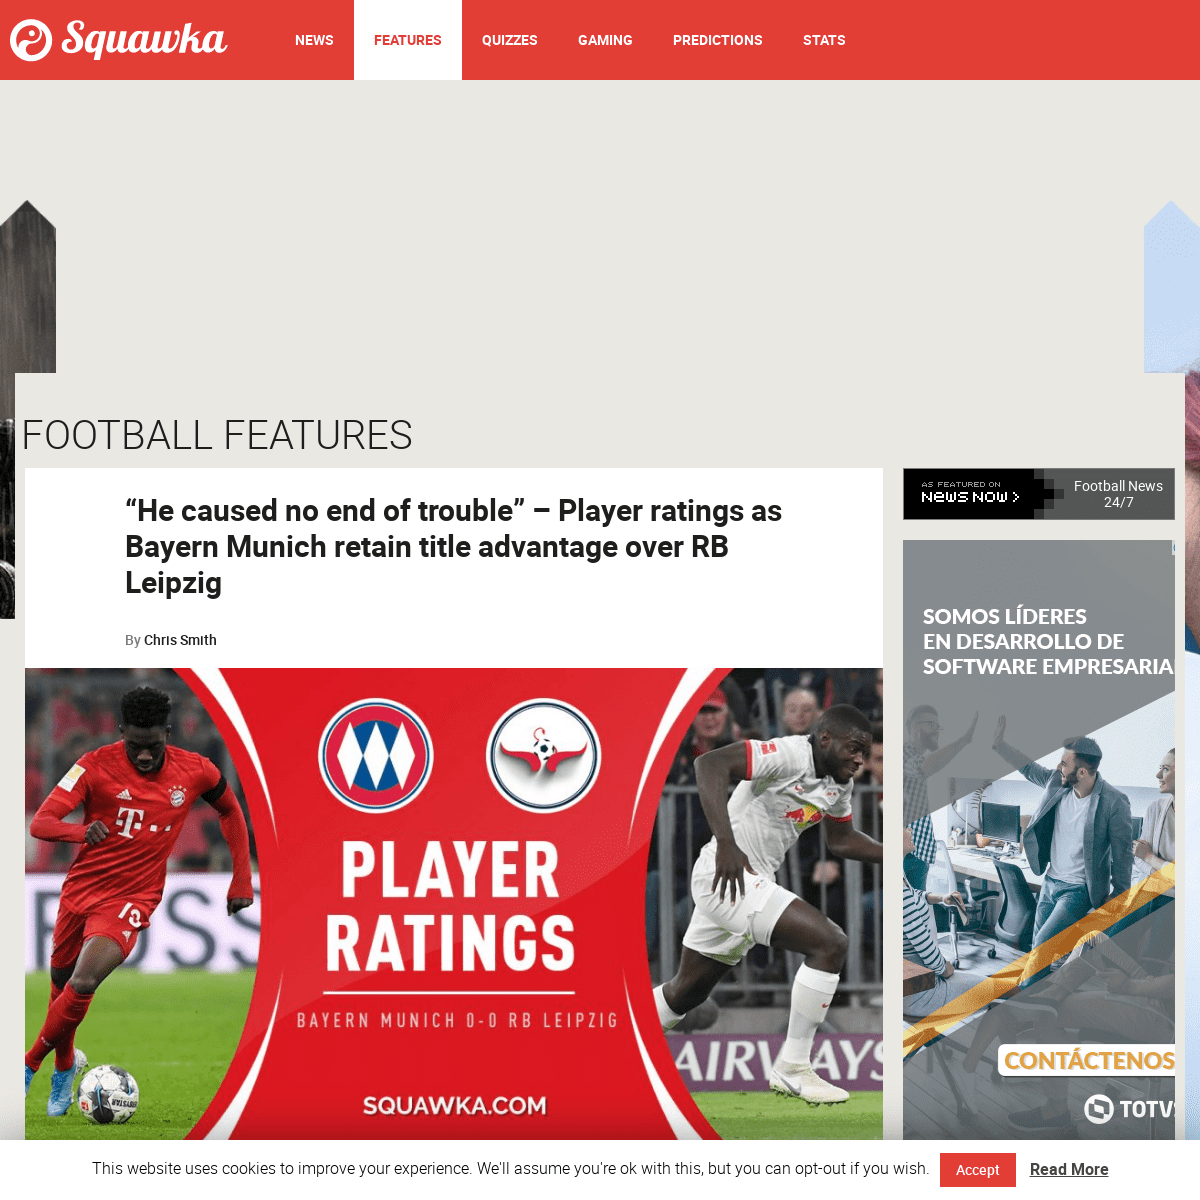 A complete backup of www.squawka.com/en/features/bayern-munich-rb-leipzig-player-ratings-bundesliga